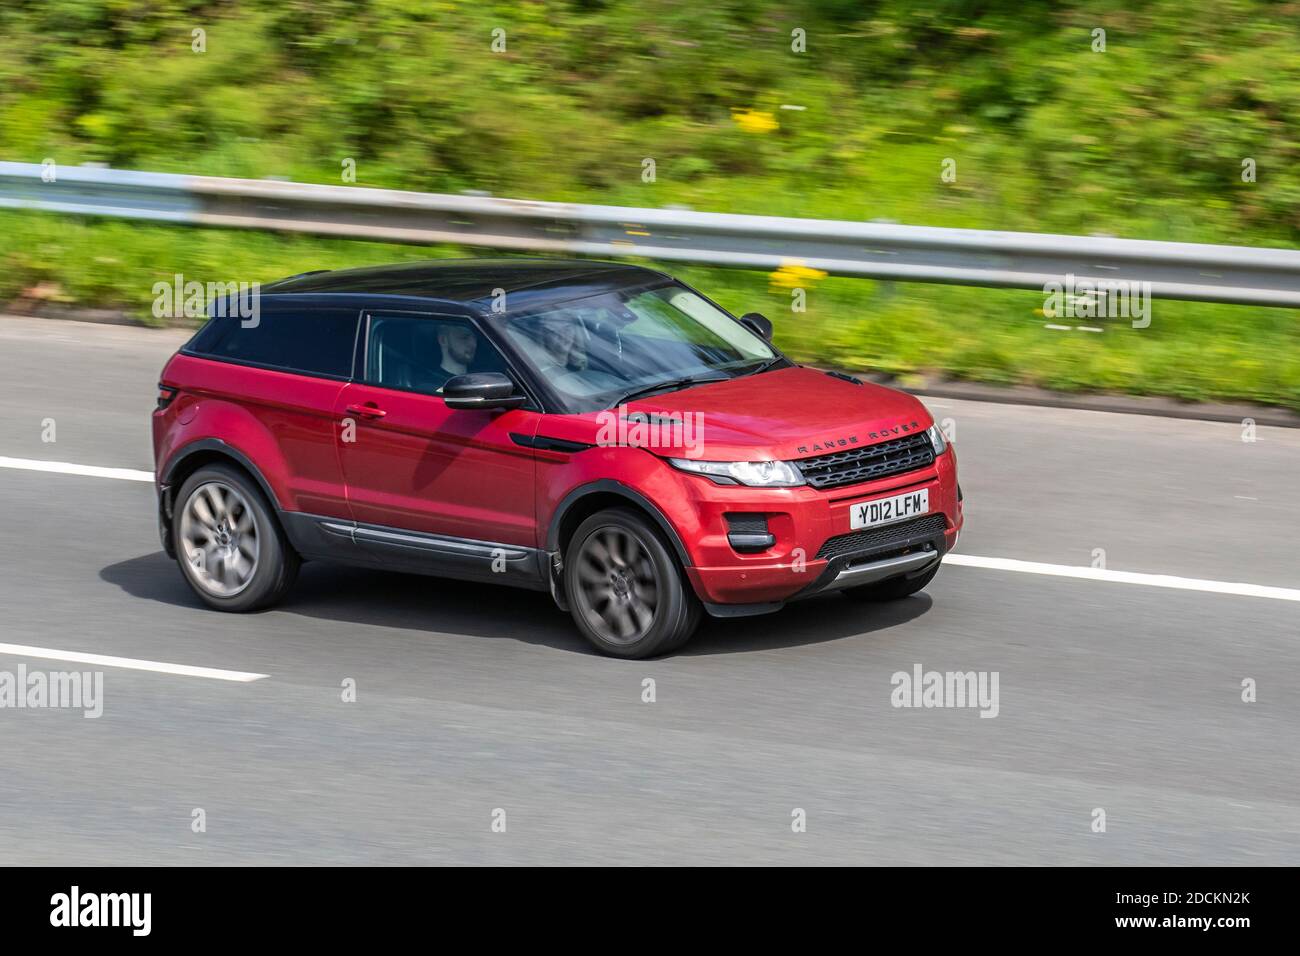 2012 Red Land Rover Range Rover Evoque Pur Tec; Vehicular traffic, moving vehicles, cars, vehicle driving on UK roads, motors, motoring on the M6 motorway highway UK road network. Stock Photo